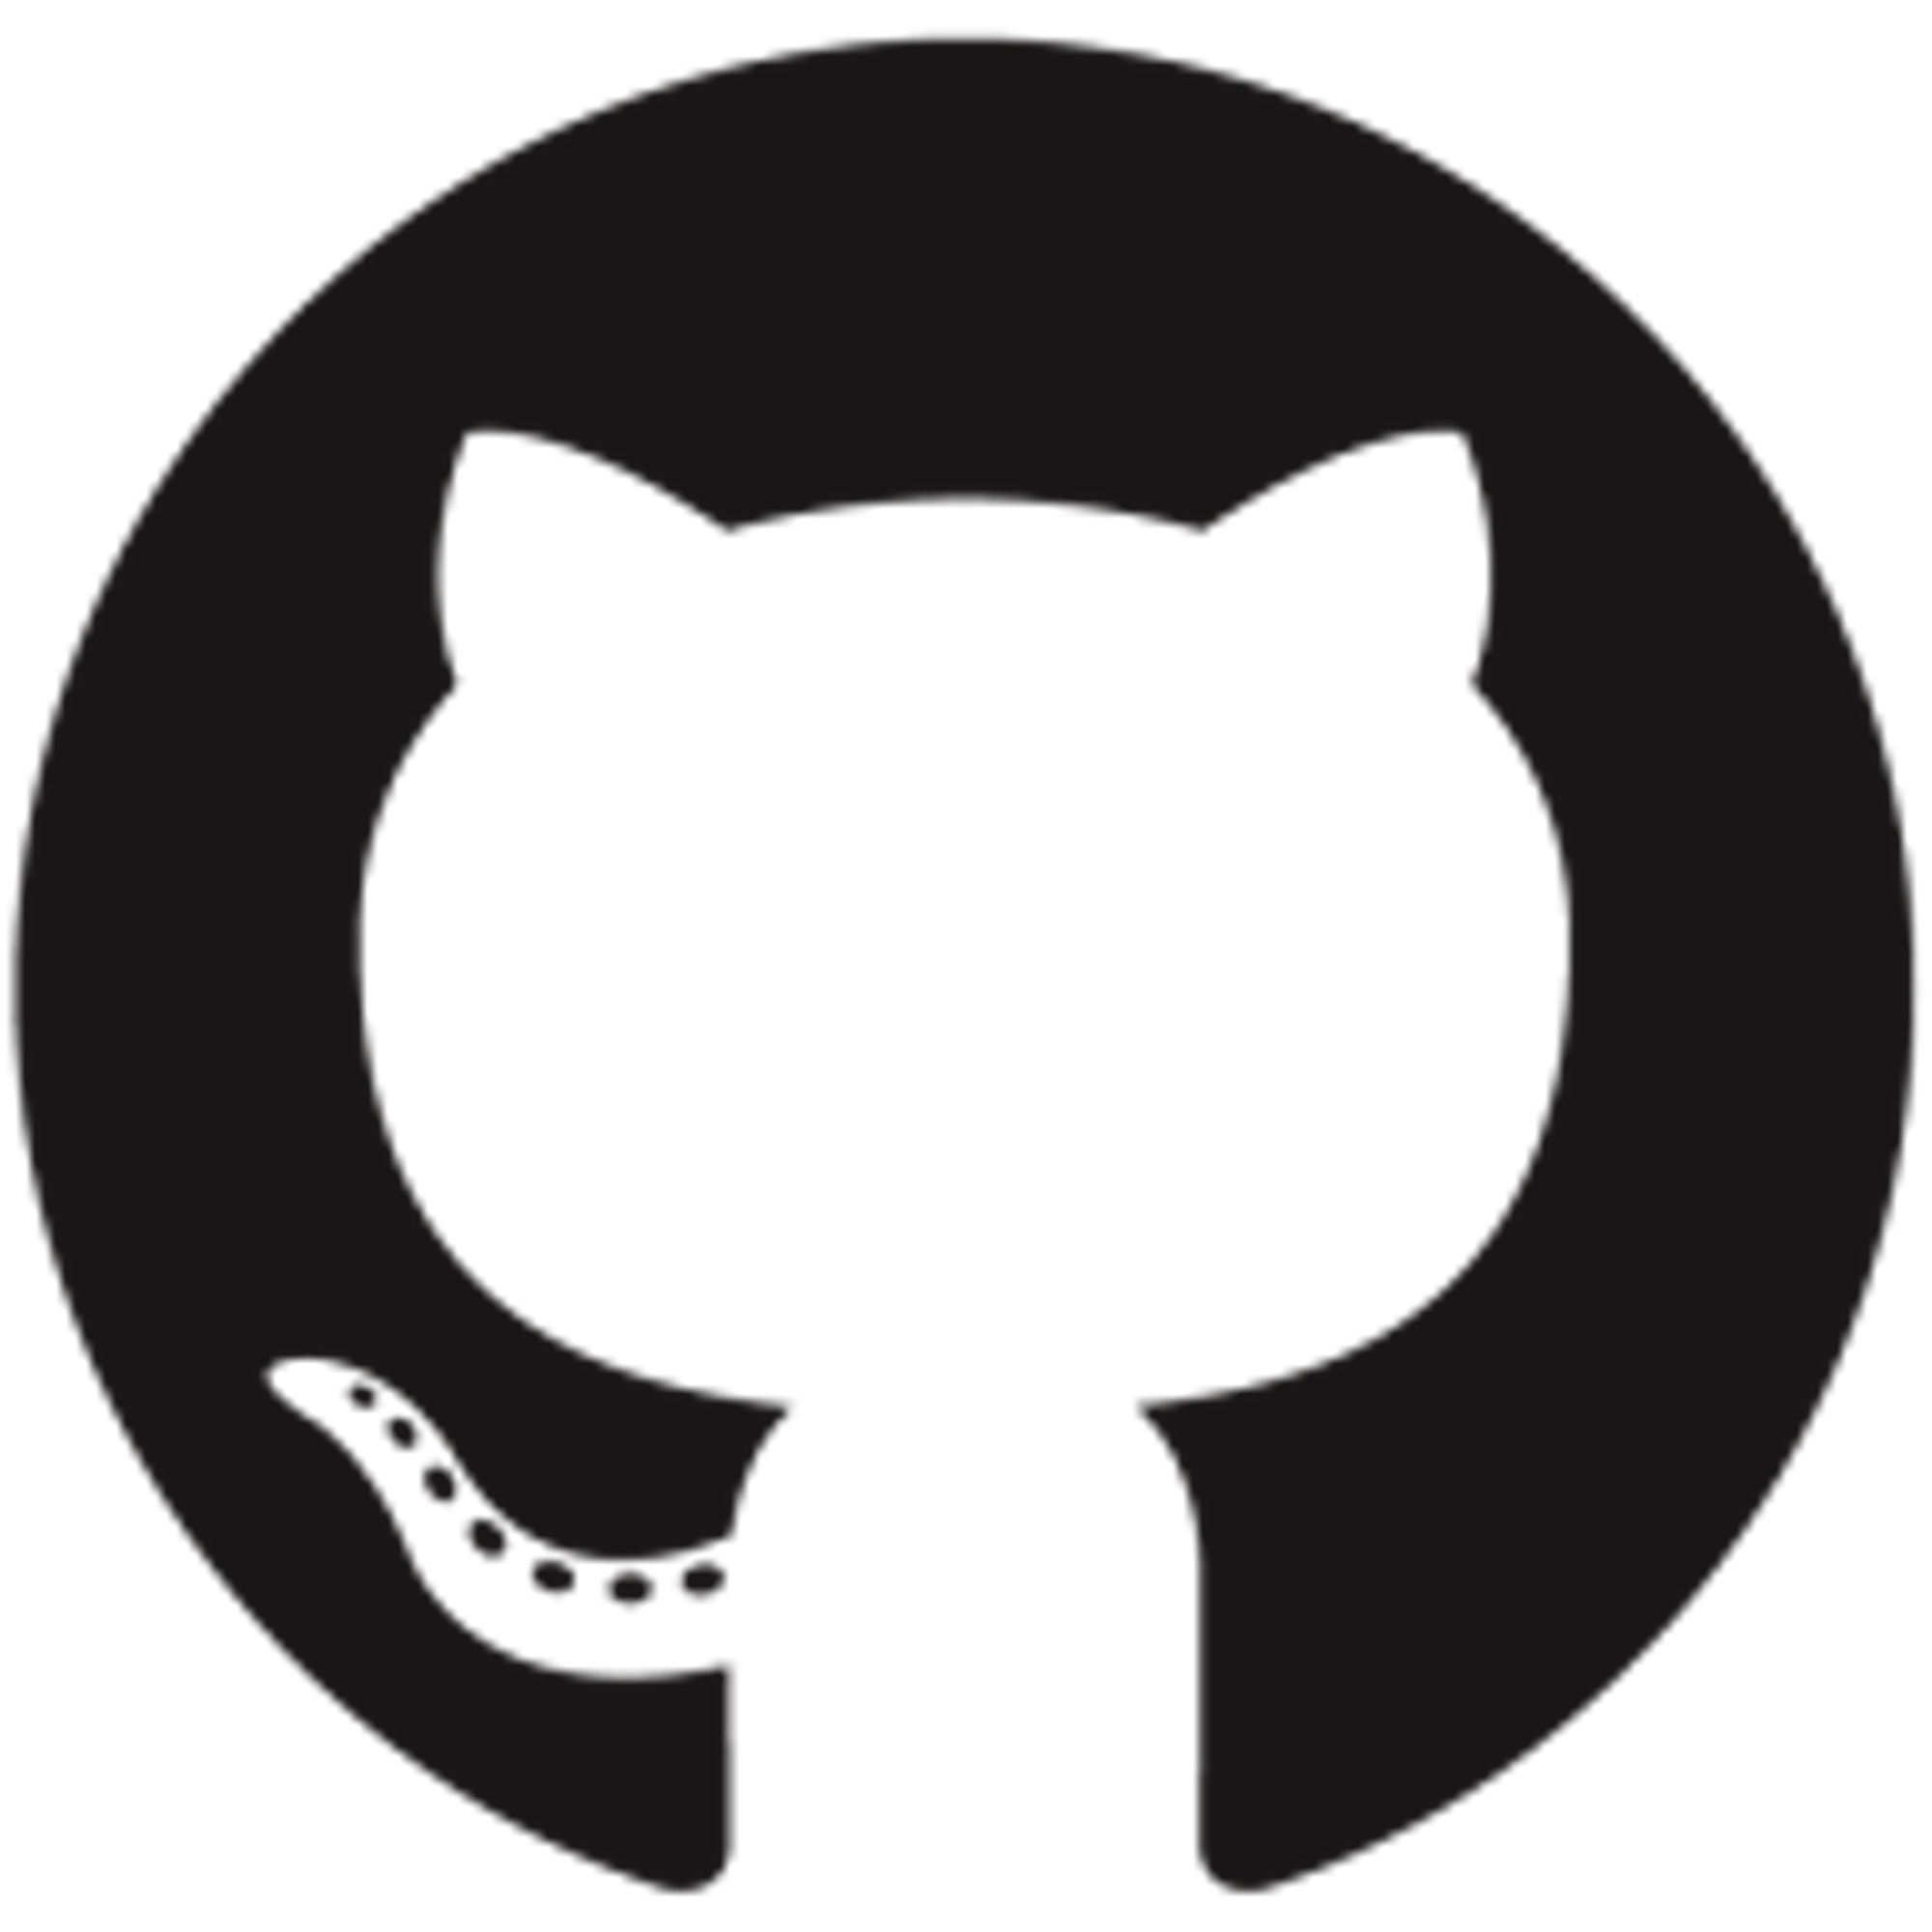 The technology behind GitHub’s new code search